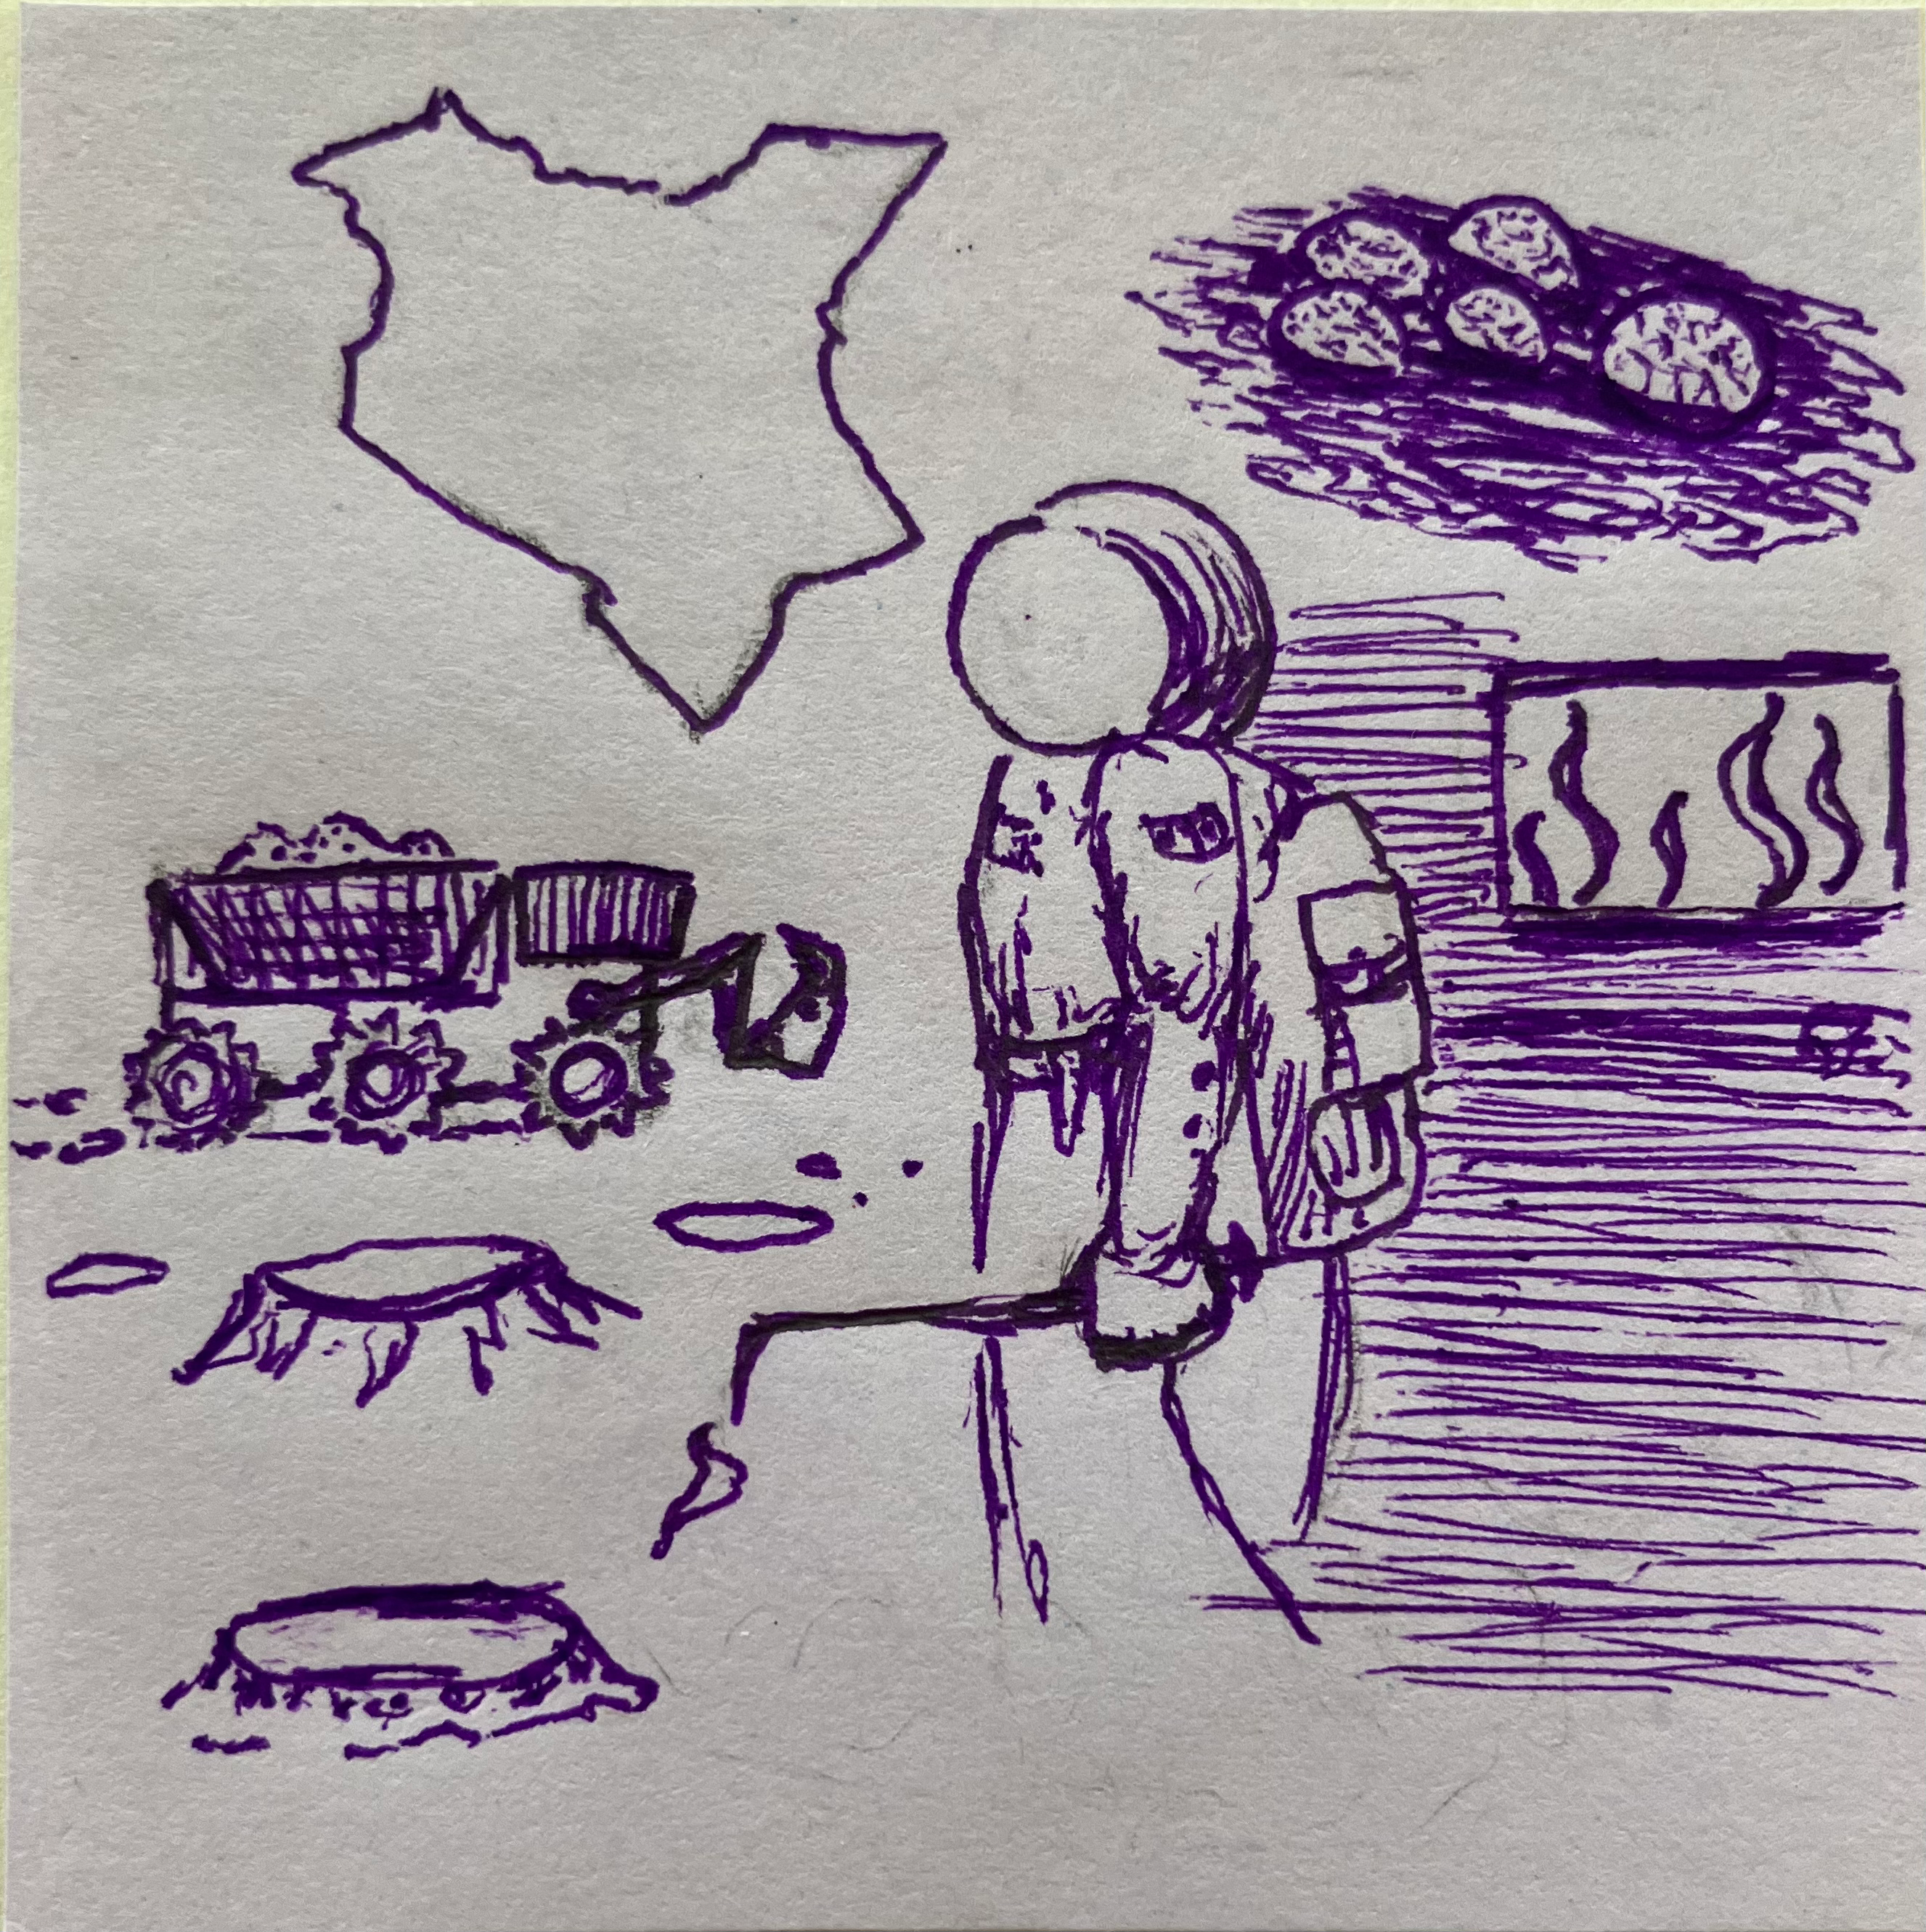 Stickynote drawing with a person in a EVA suit, outline of Kenya, harvester machine, and seaweed tank